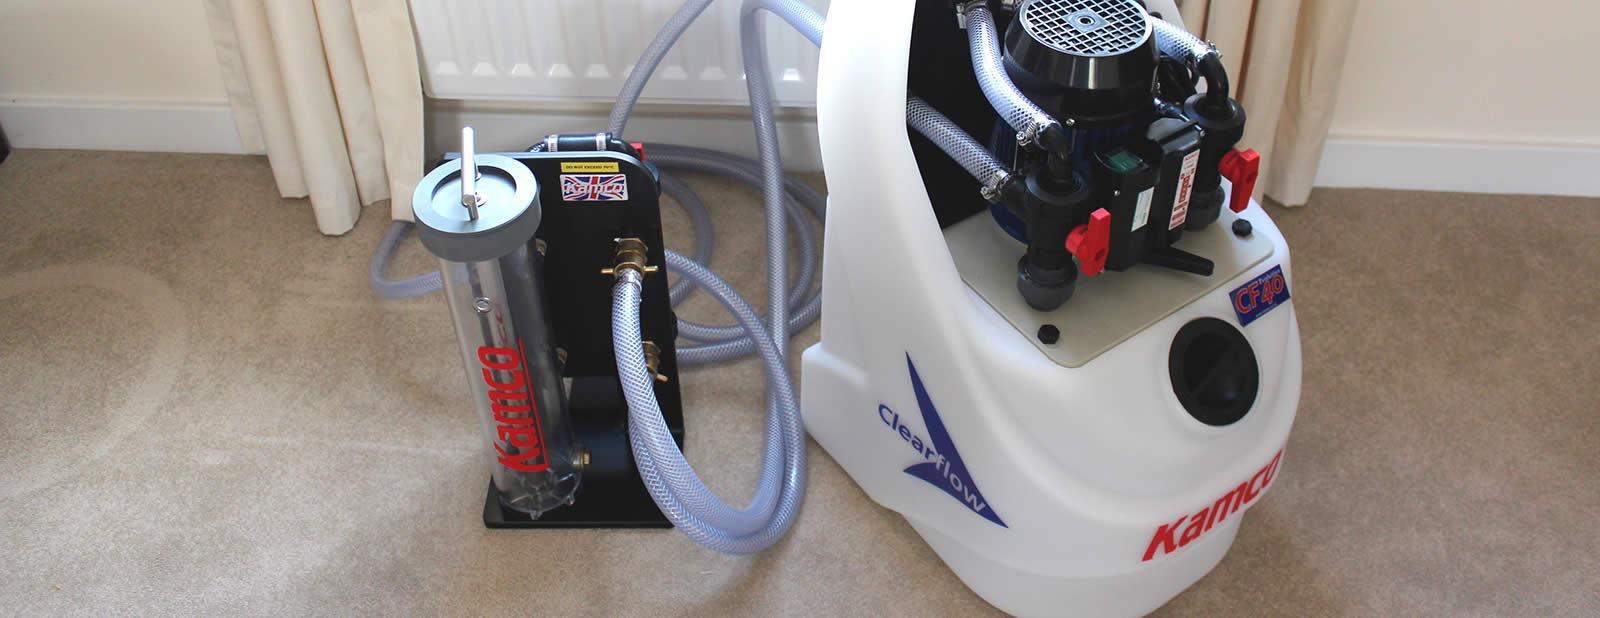 Peter Brown Power flushing Services